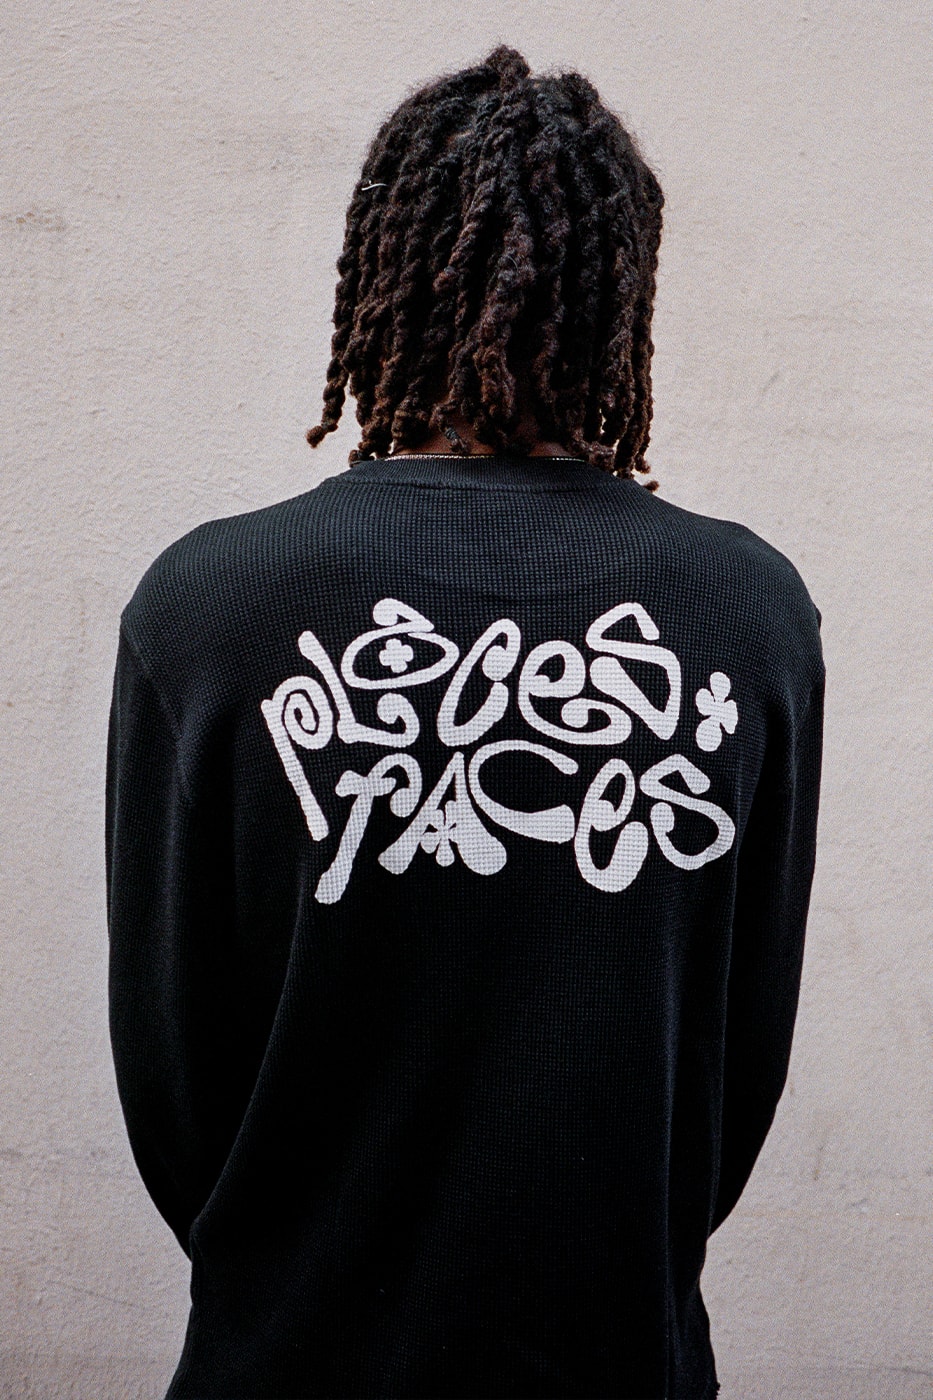 Places+Faces Cozy Drop Collection Release Info Date Buy Price 